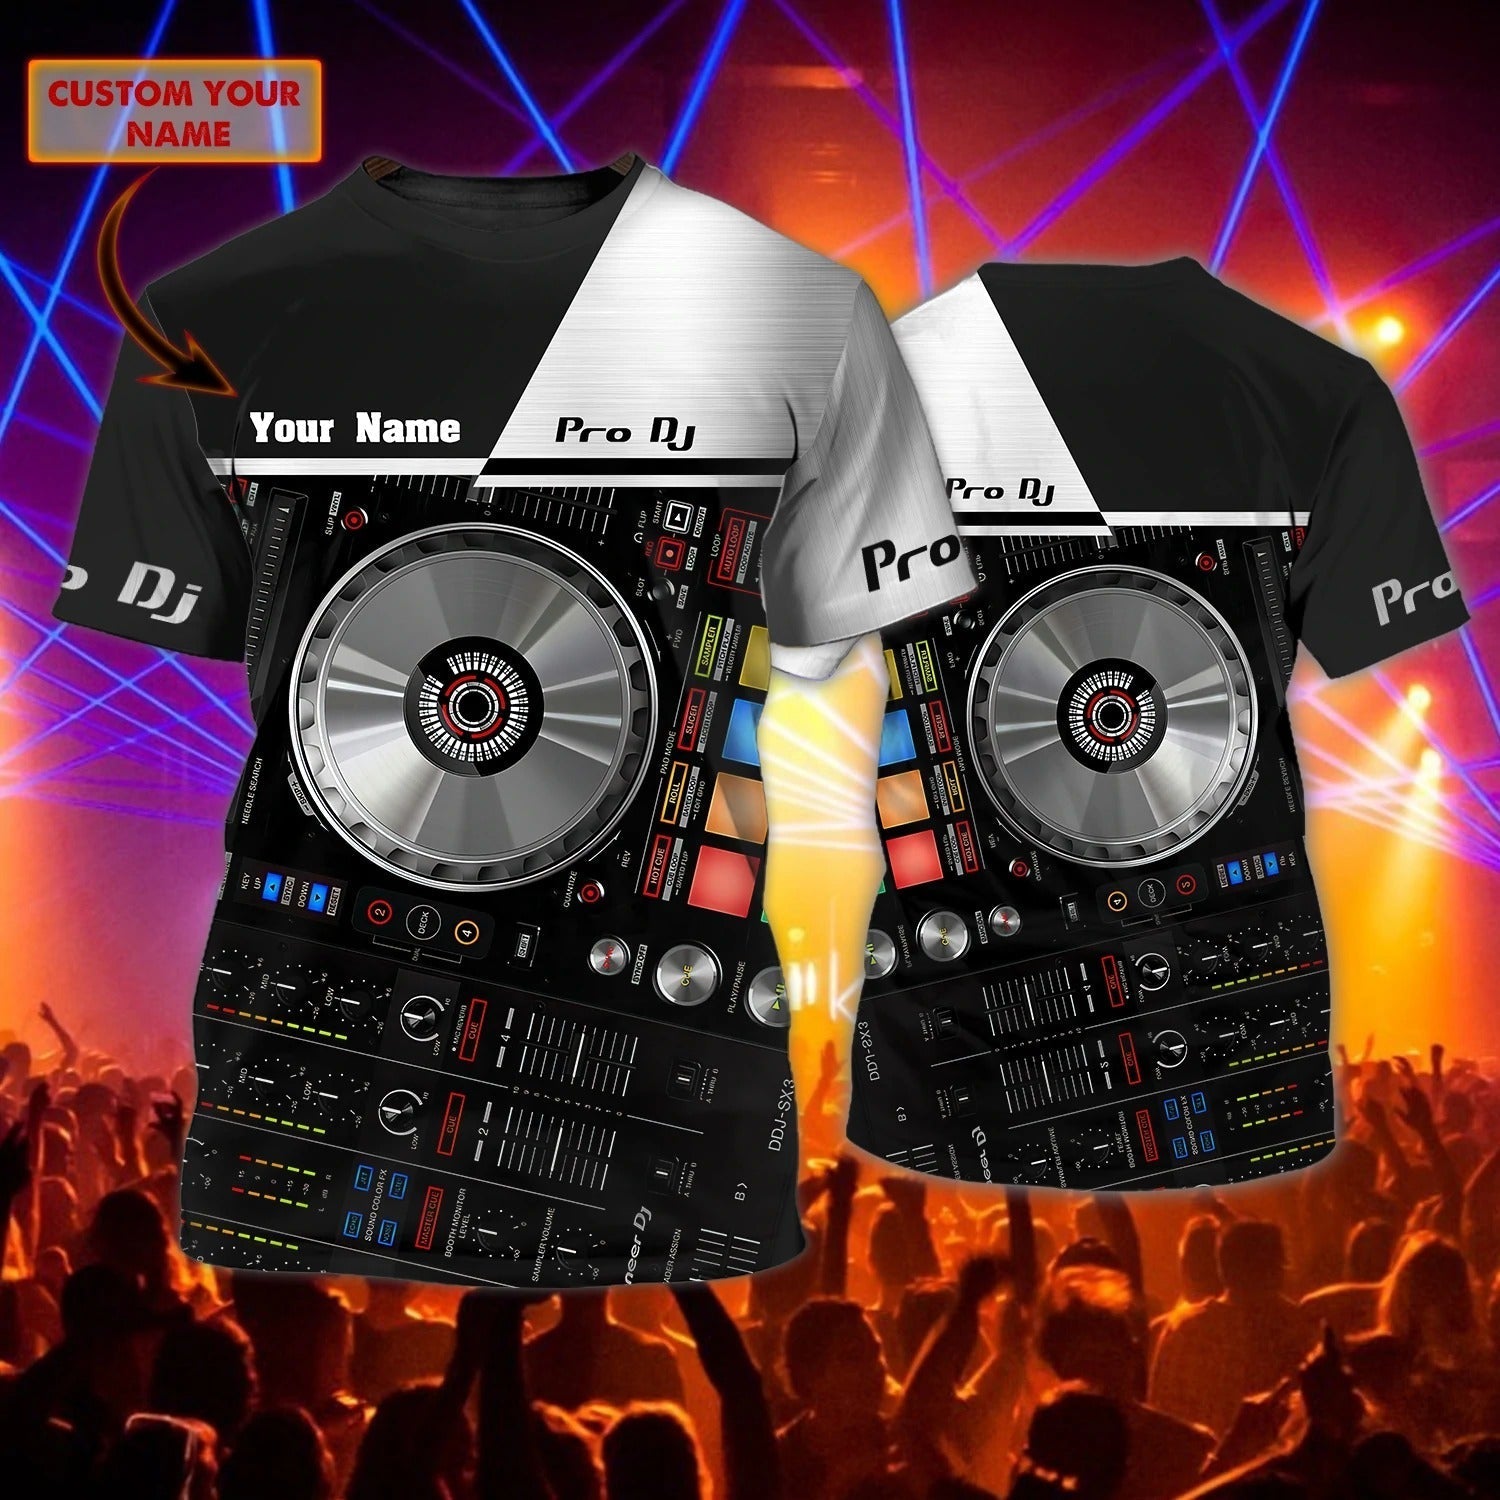 Custom A Dj T Shirt For Her/ To My Wife Dj Gifts/ Deejay T Shirt All Over Print/ Music Party Shirts